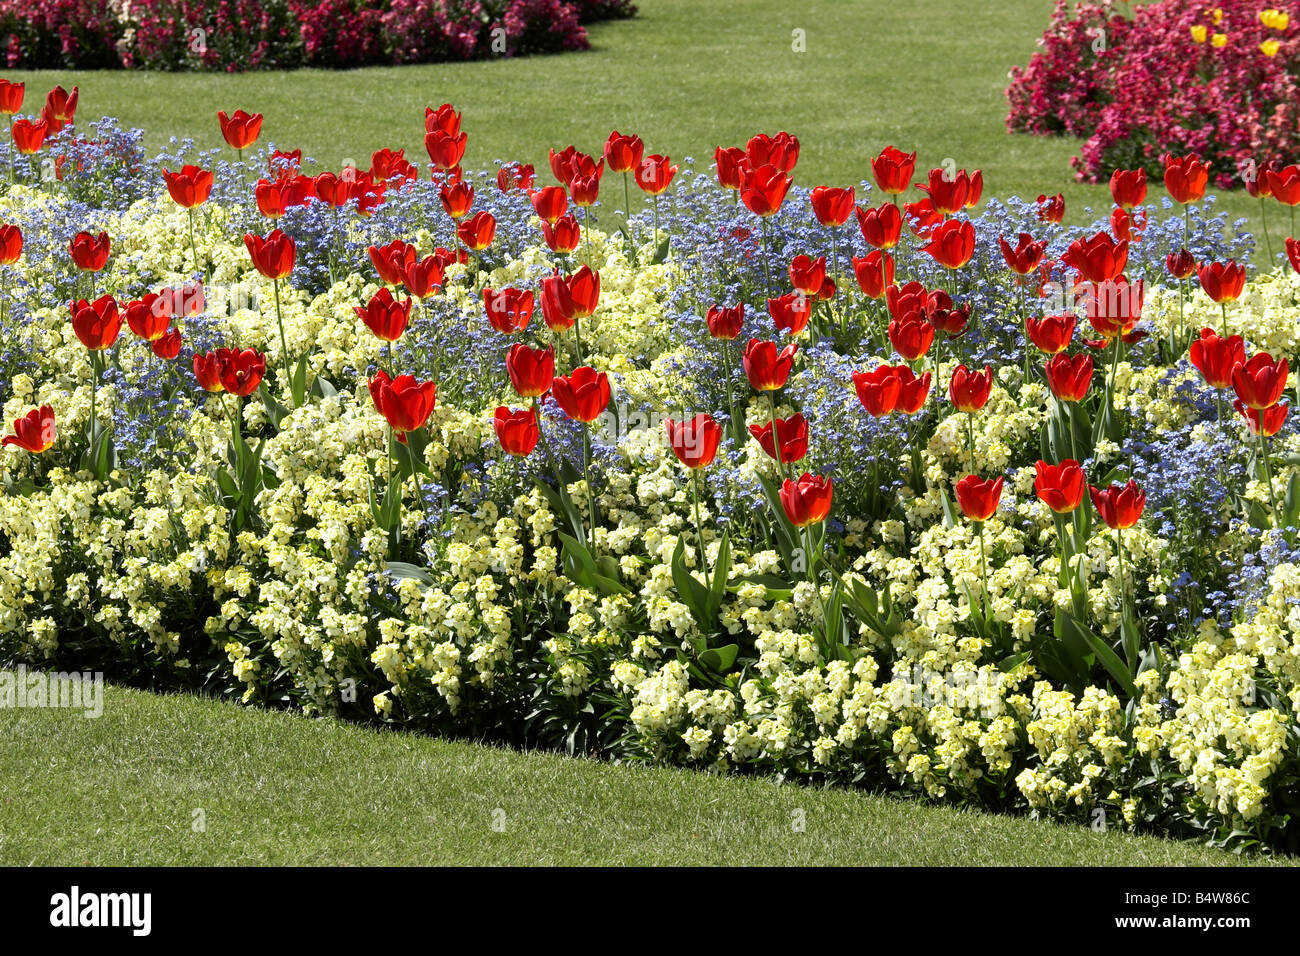 Tulip and other flower beds in St James s Park CIty of Westminster SW1 London England Stock Photo